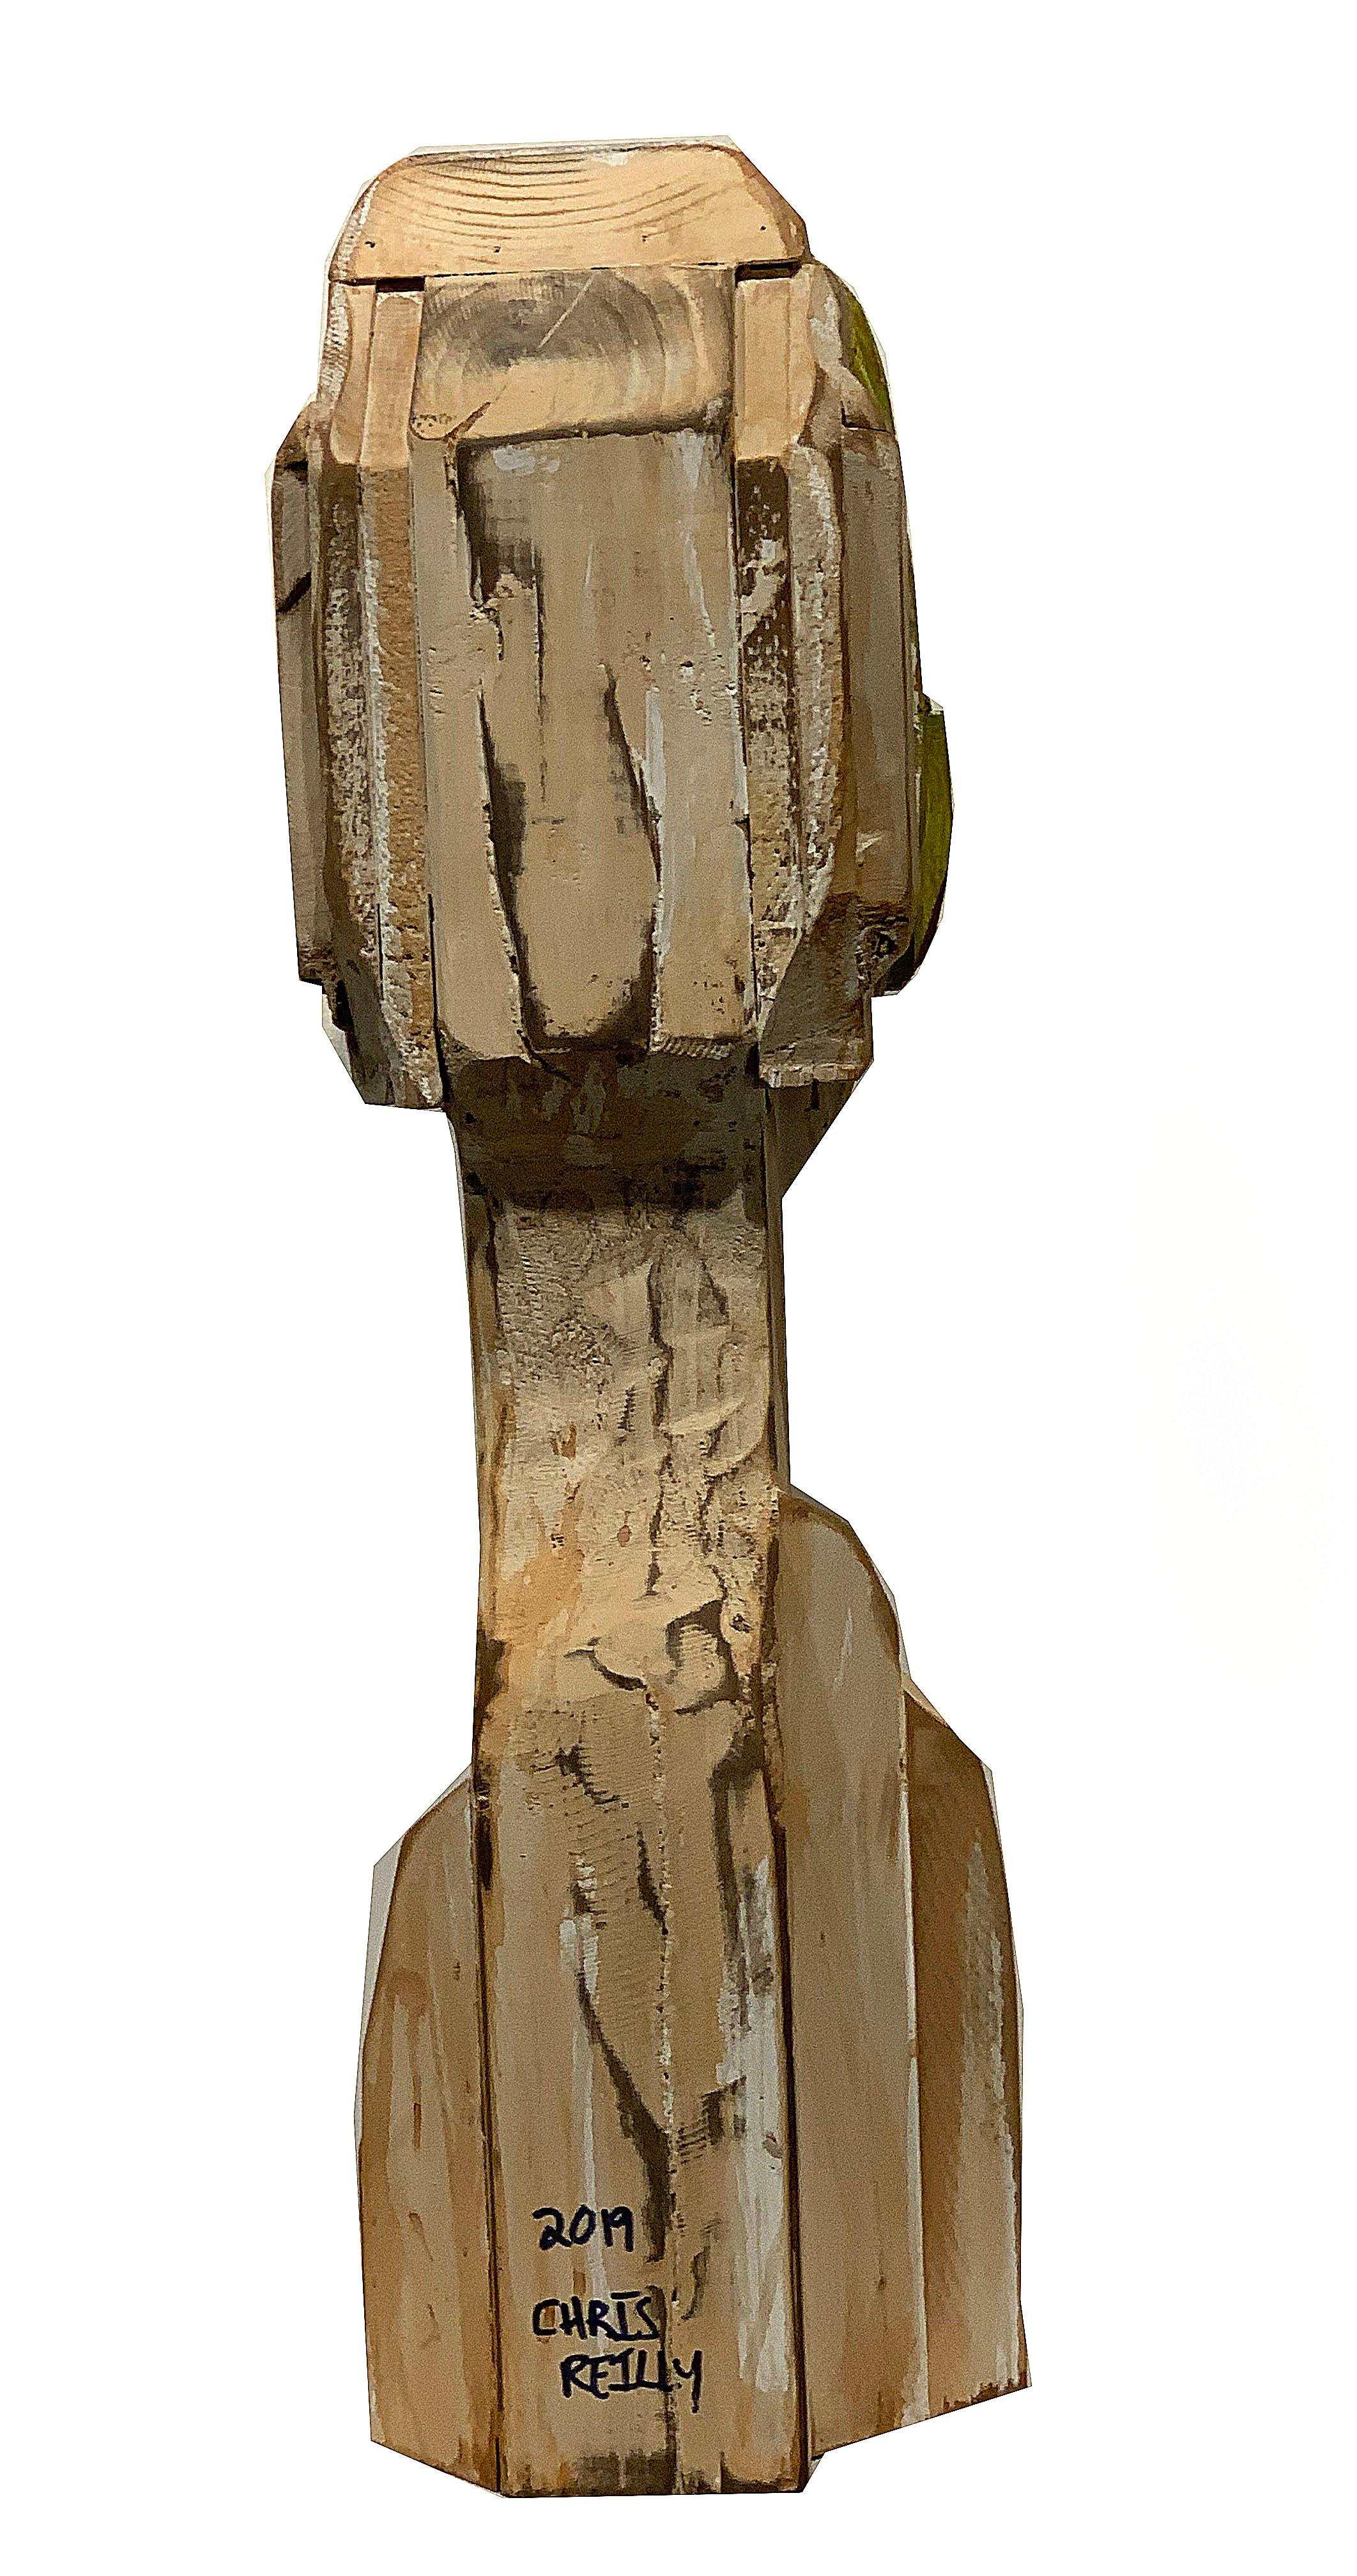 Mixed-media Wood Sculpture - Contemporary Art by Chris Reilly